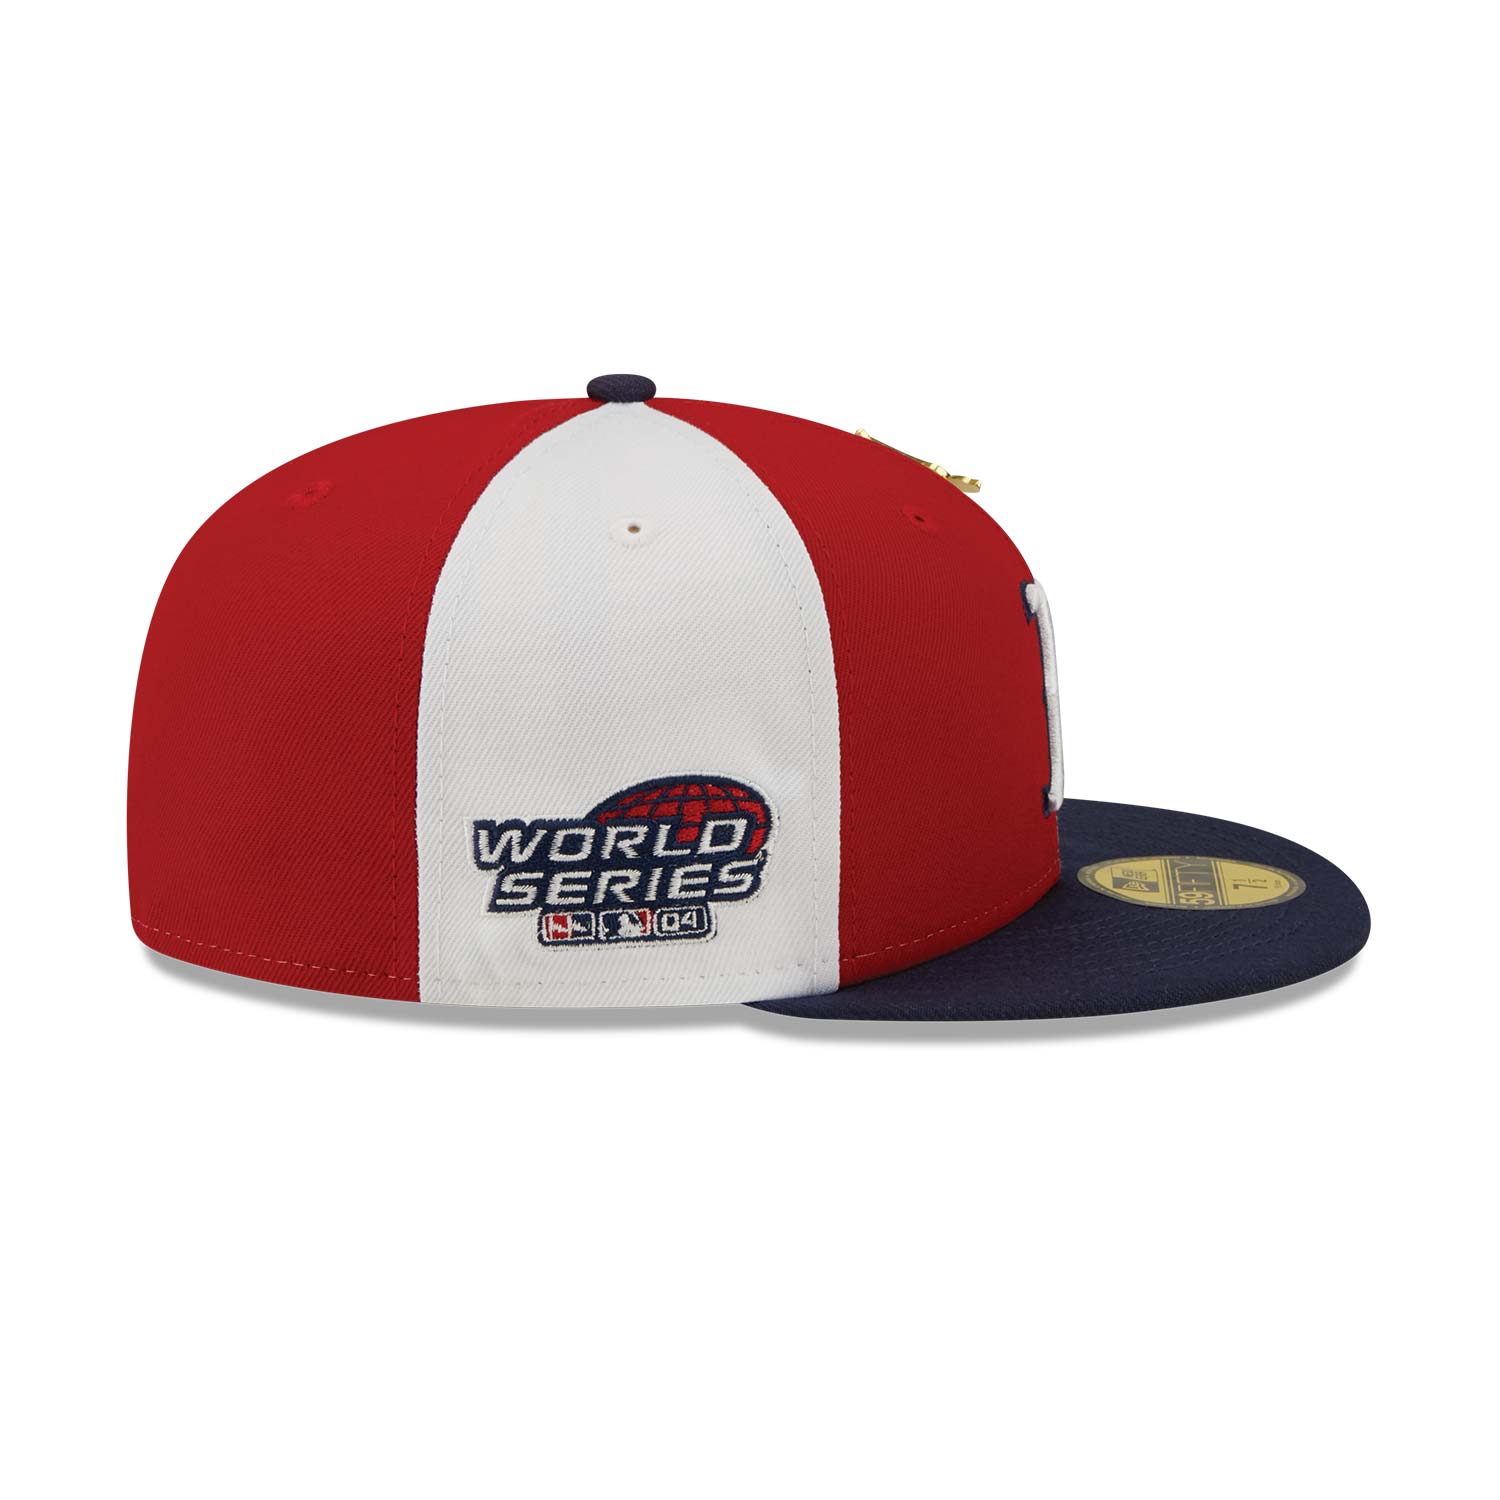 Boston Red Sox Pinwheel Americana Red 59FIFTY Fitted Cap